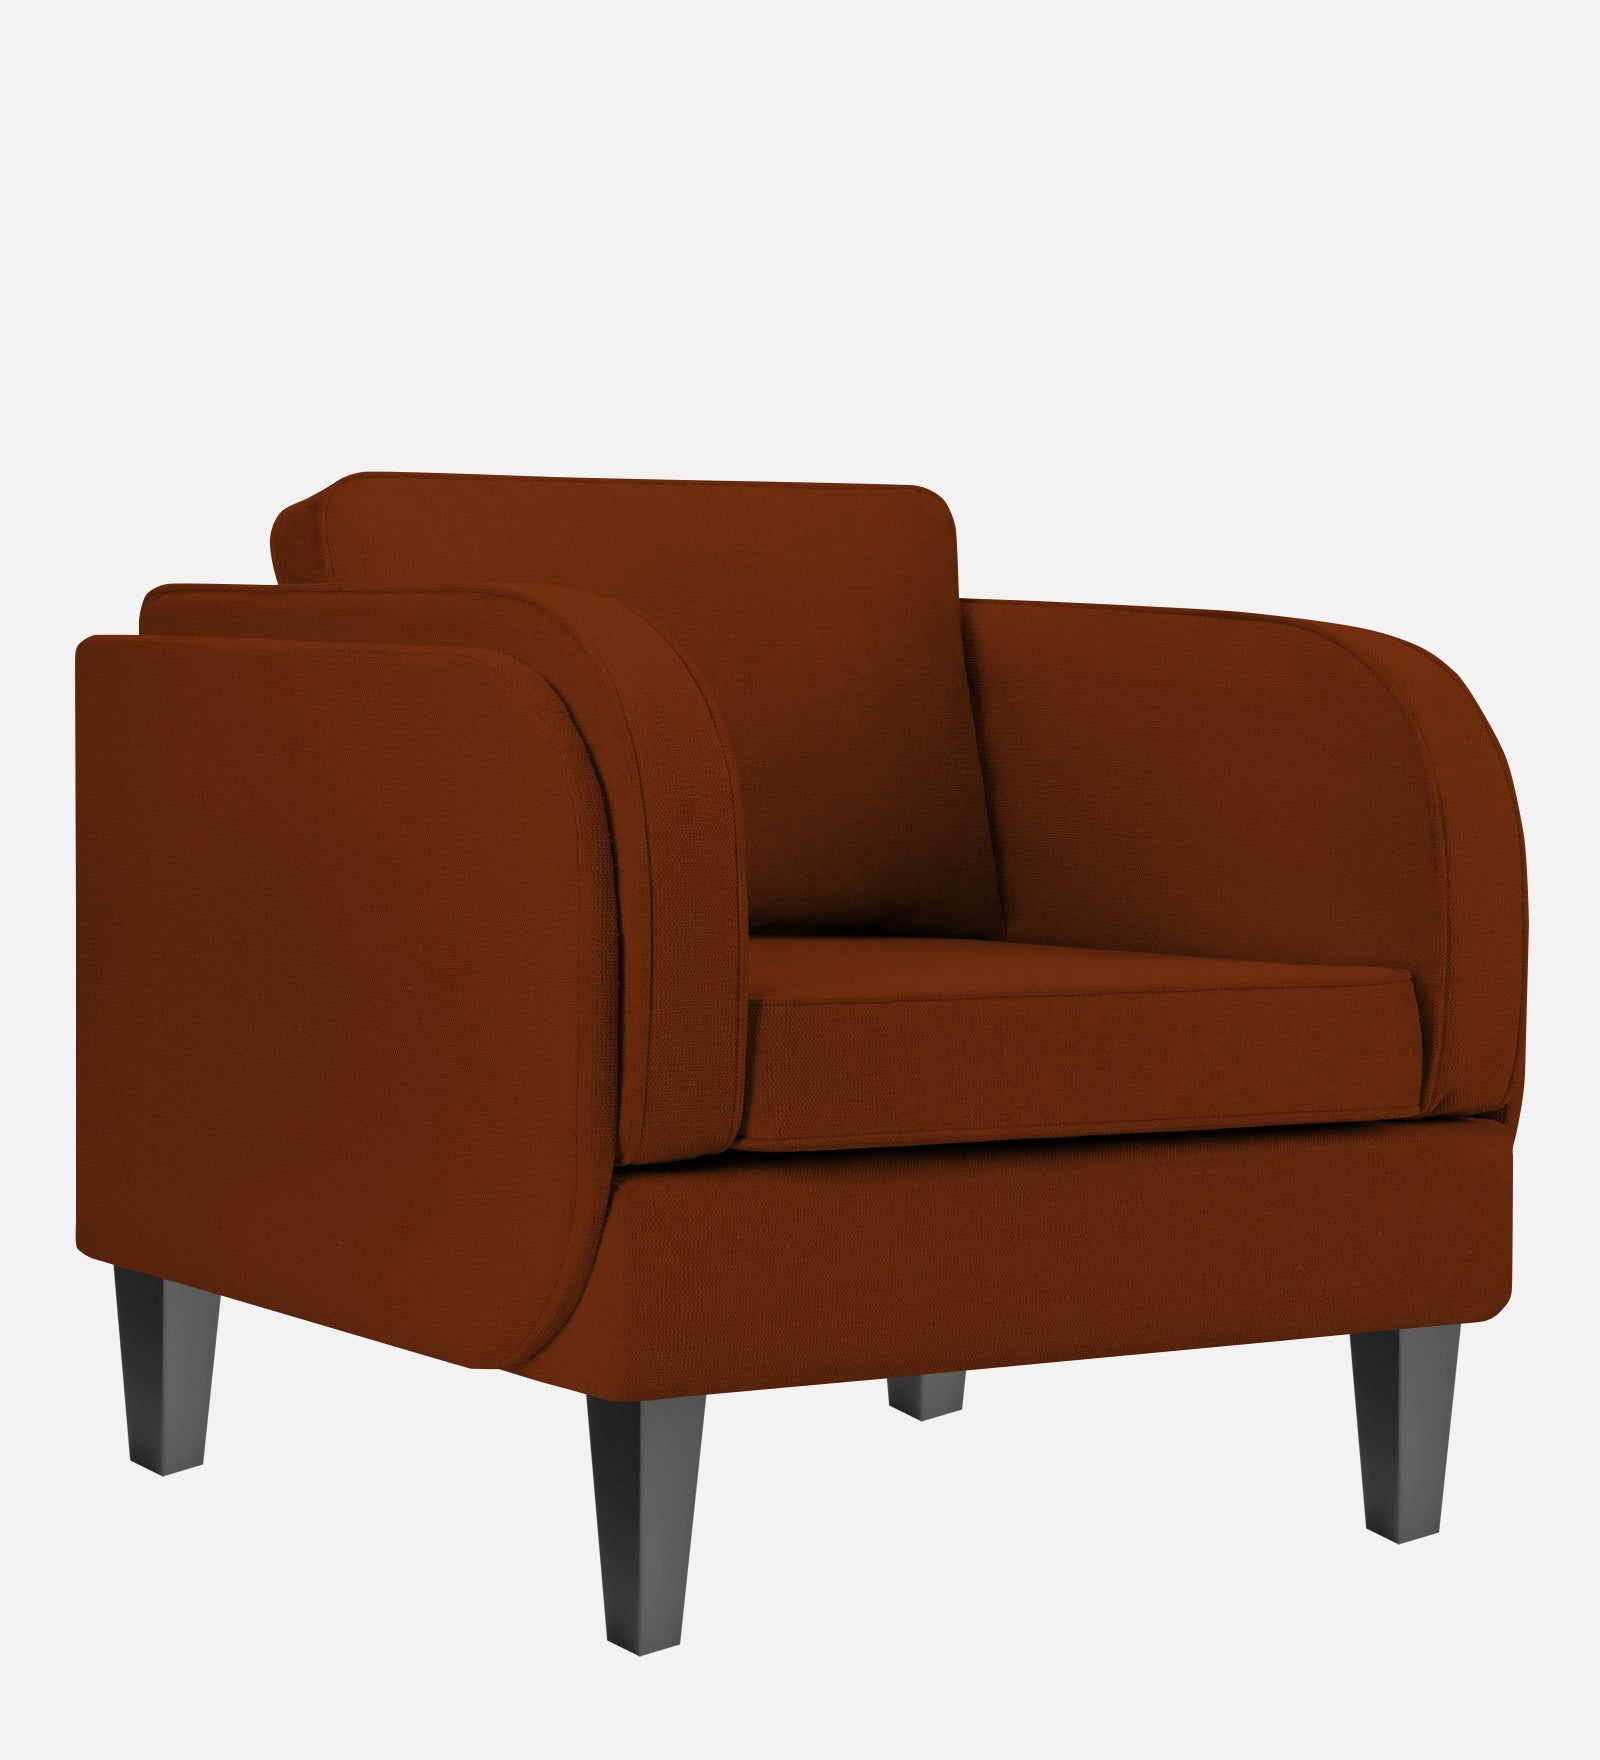 Siddy Fabric 1 Seater Sofa in Burnt Orange Colour